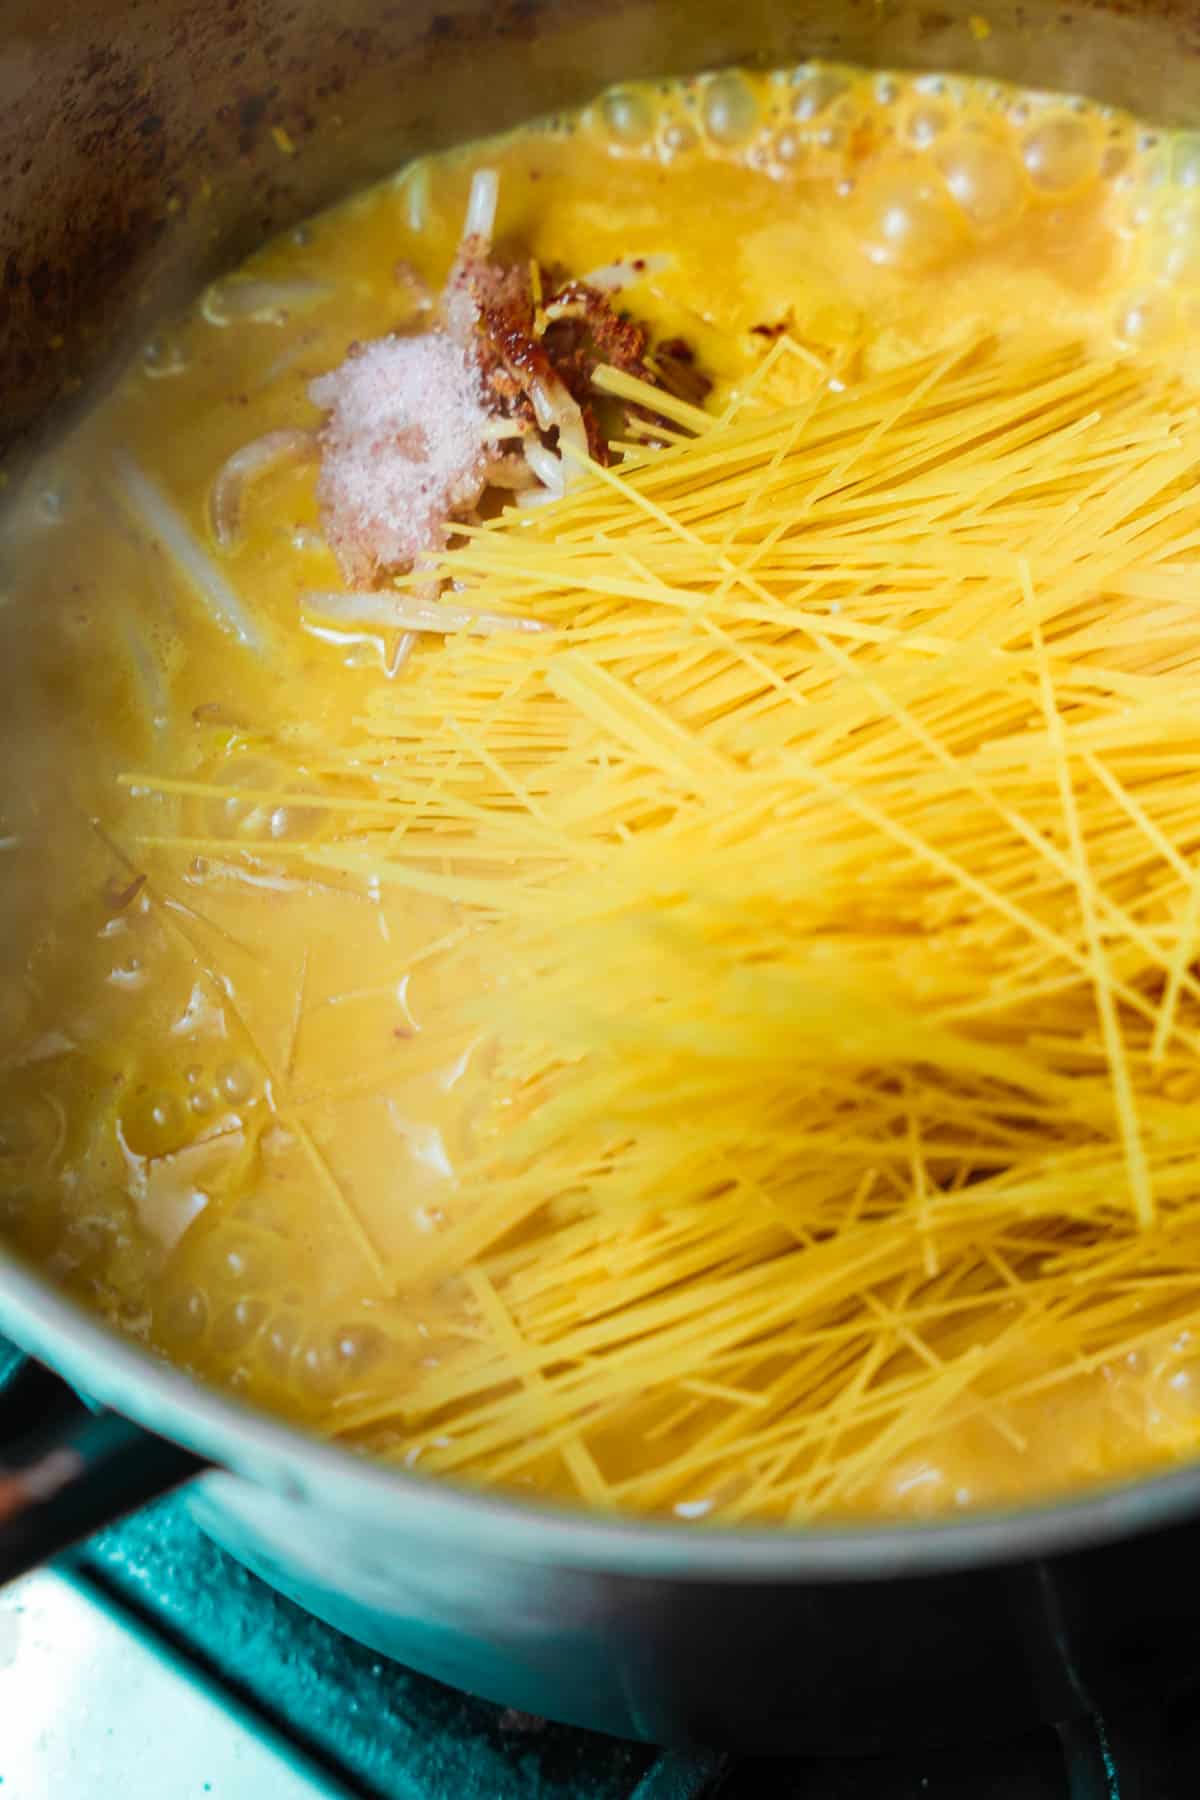 Angel hair pasta and seasonings are added to the pot of curry.